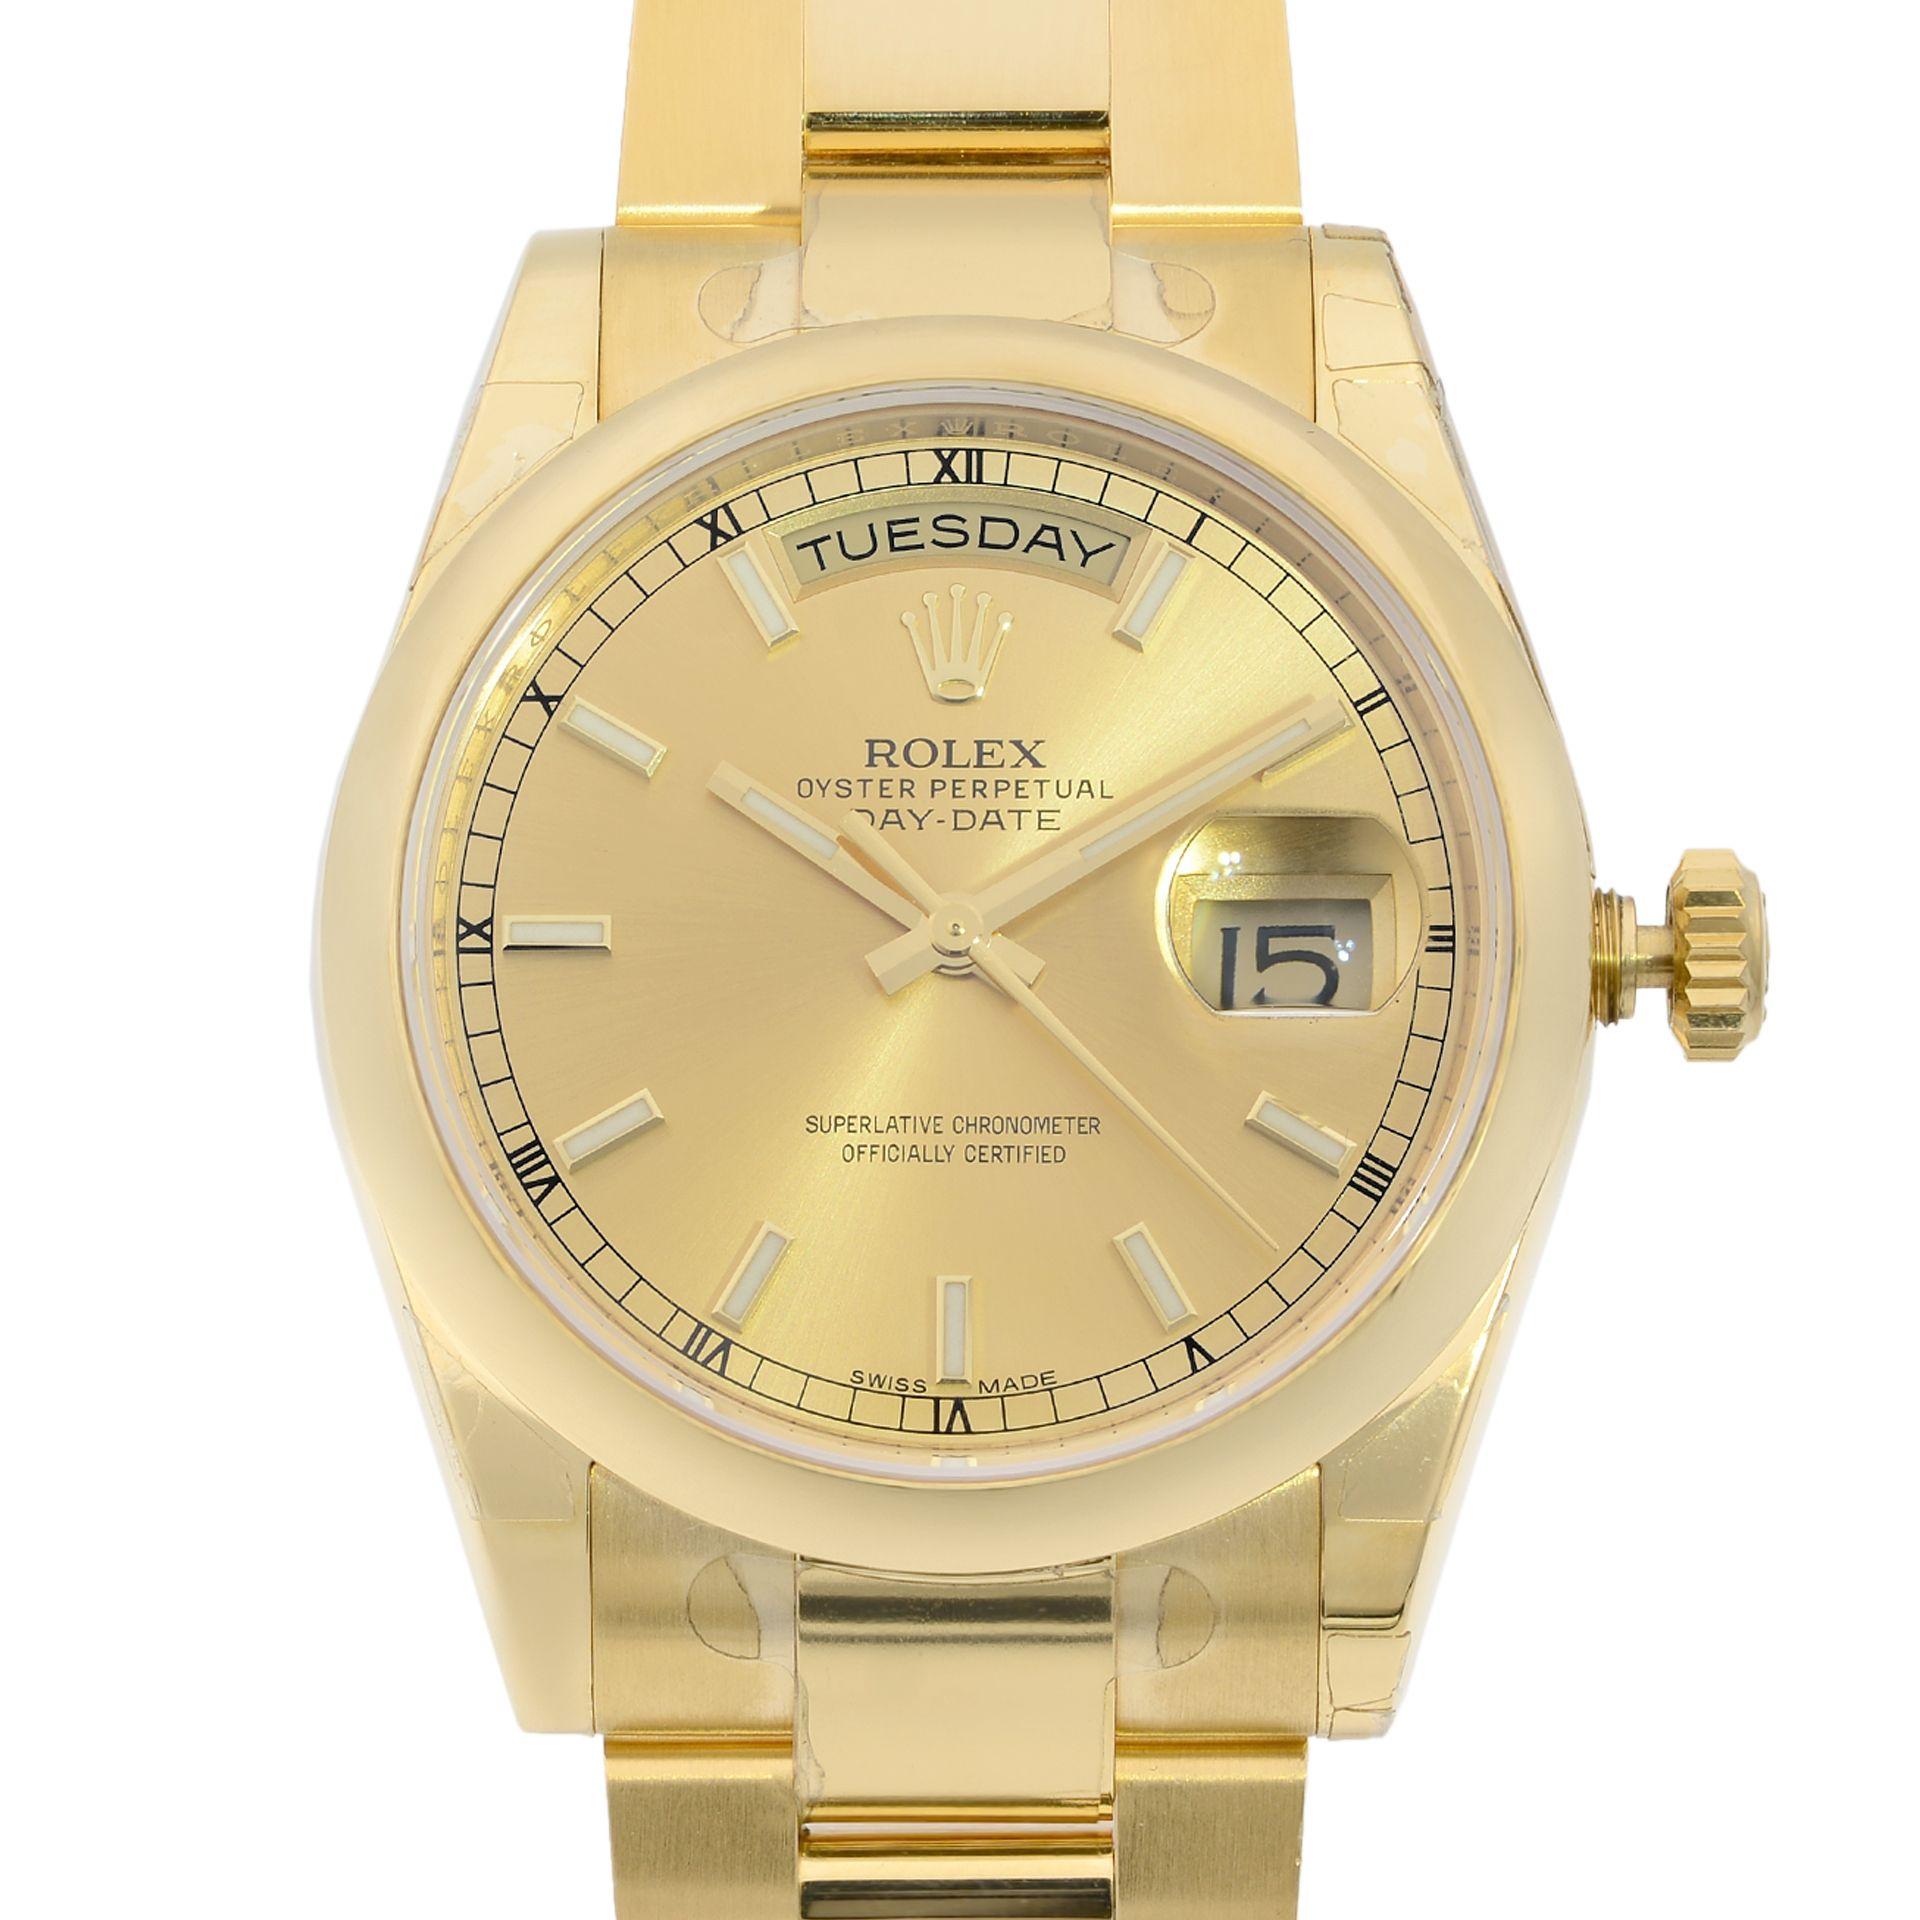 This brand new Rolex Day-Date 118208-CSO is a beautiful men's timepiece that is powered by a mechanical (automatic) movement which is cased in a yellow gold case. It has a round shape face, day & date dial, and has hand sticks style markers. It is